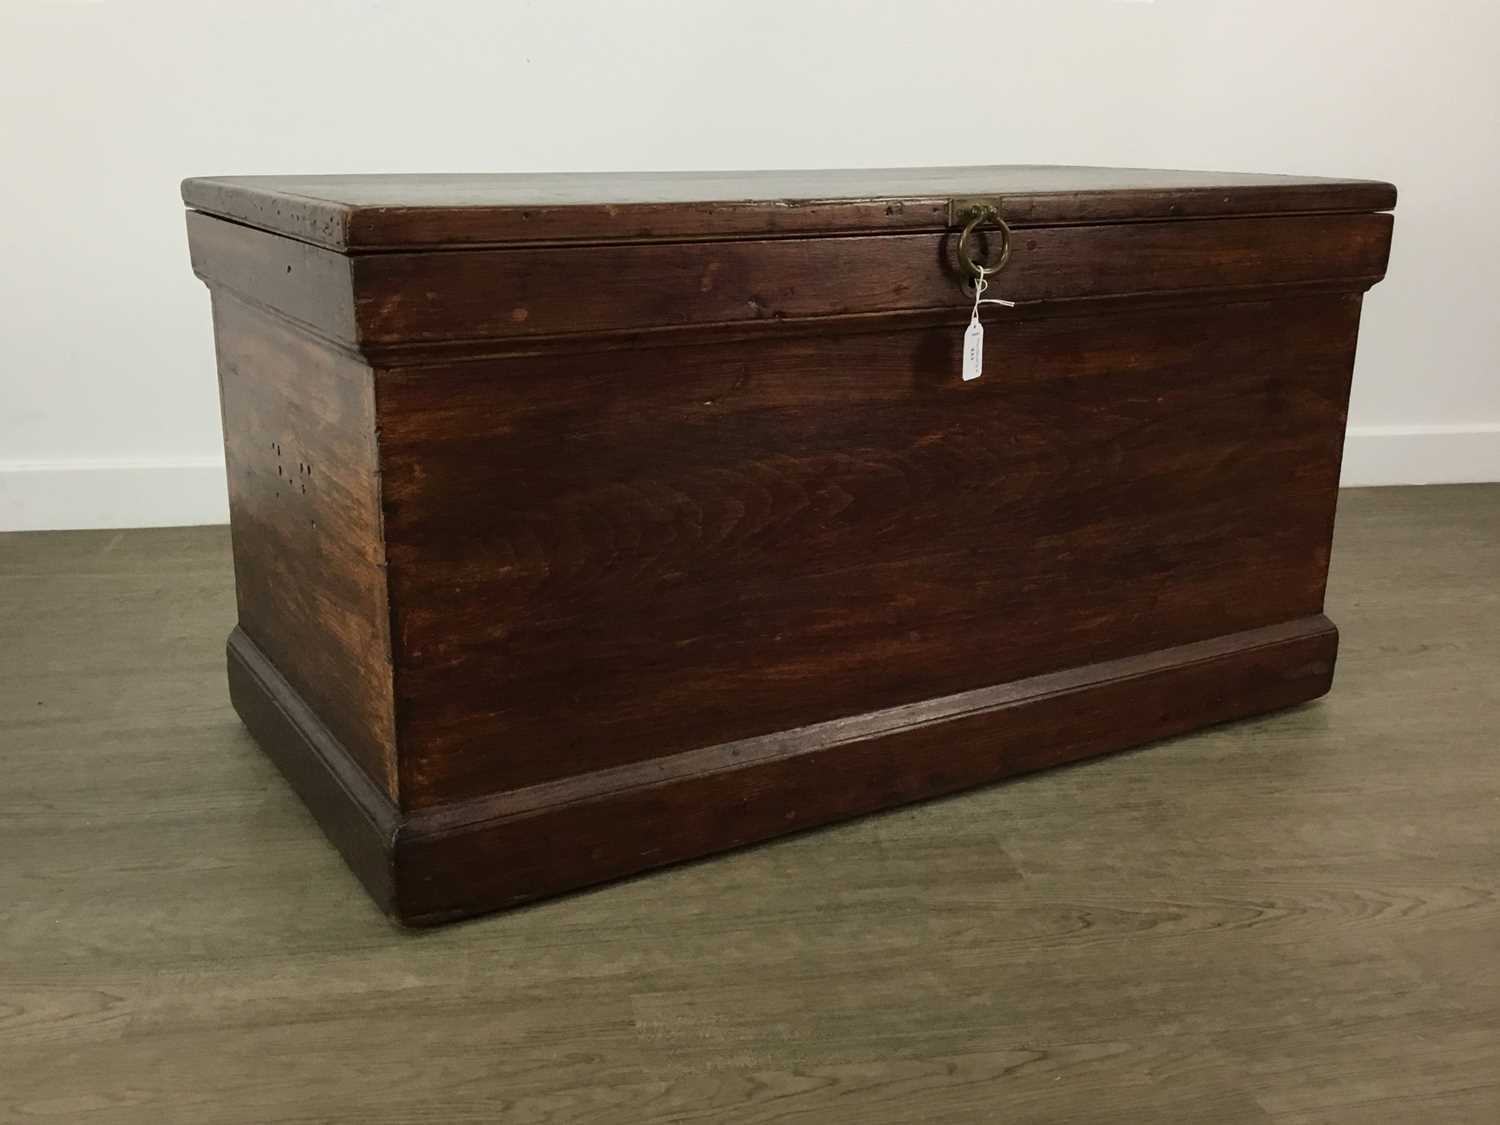 STAINED WOOD BLANKET CHEST, EARLY 20TH CENTURY